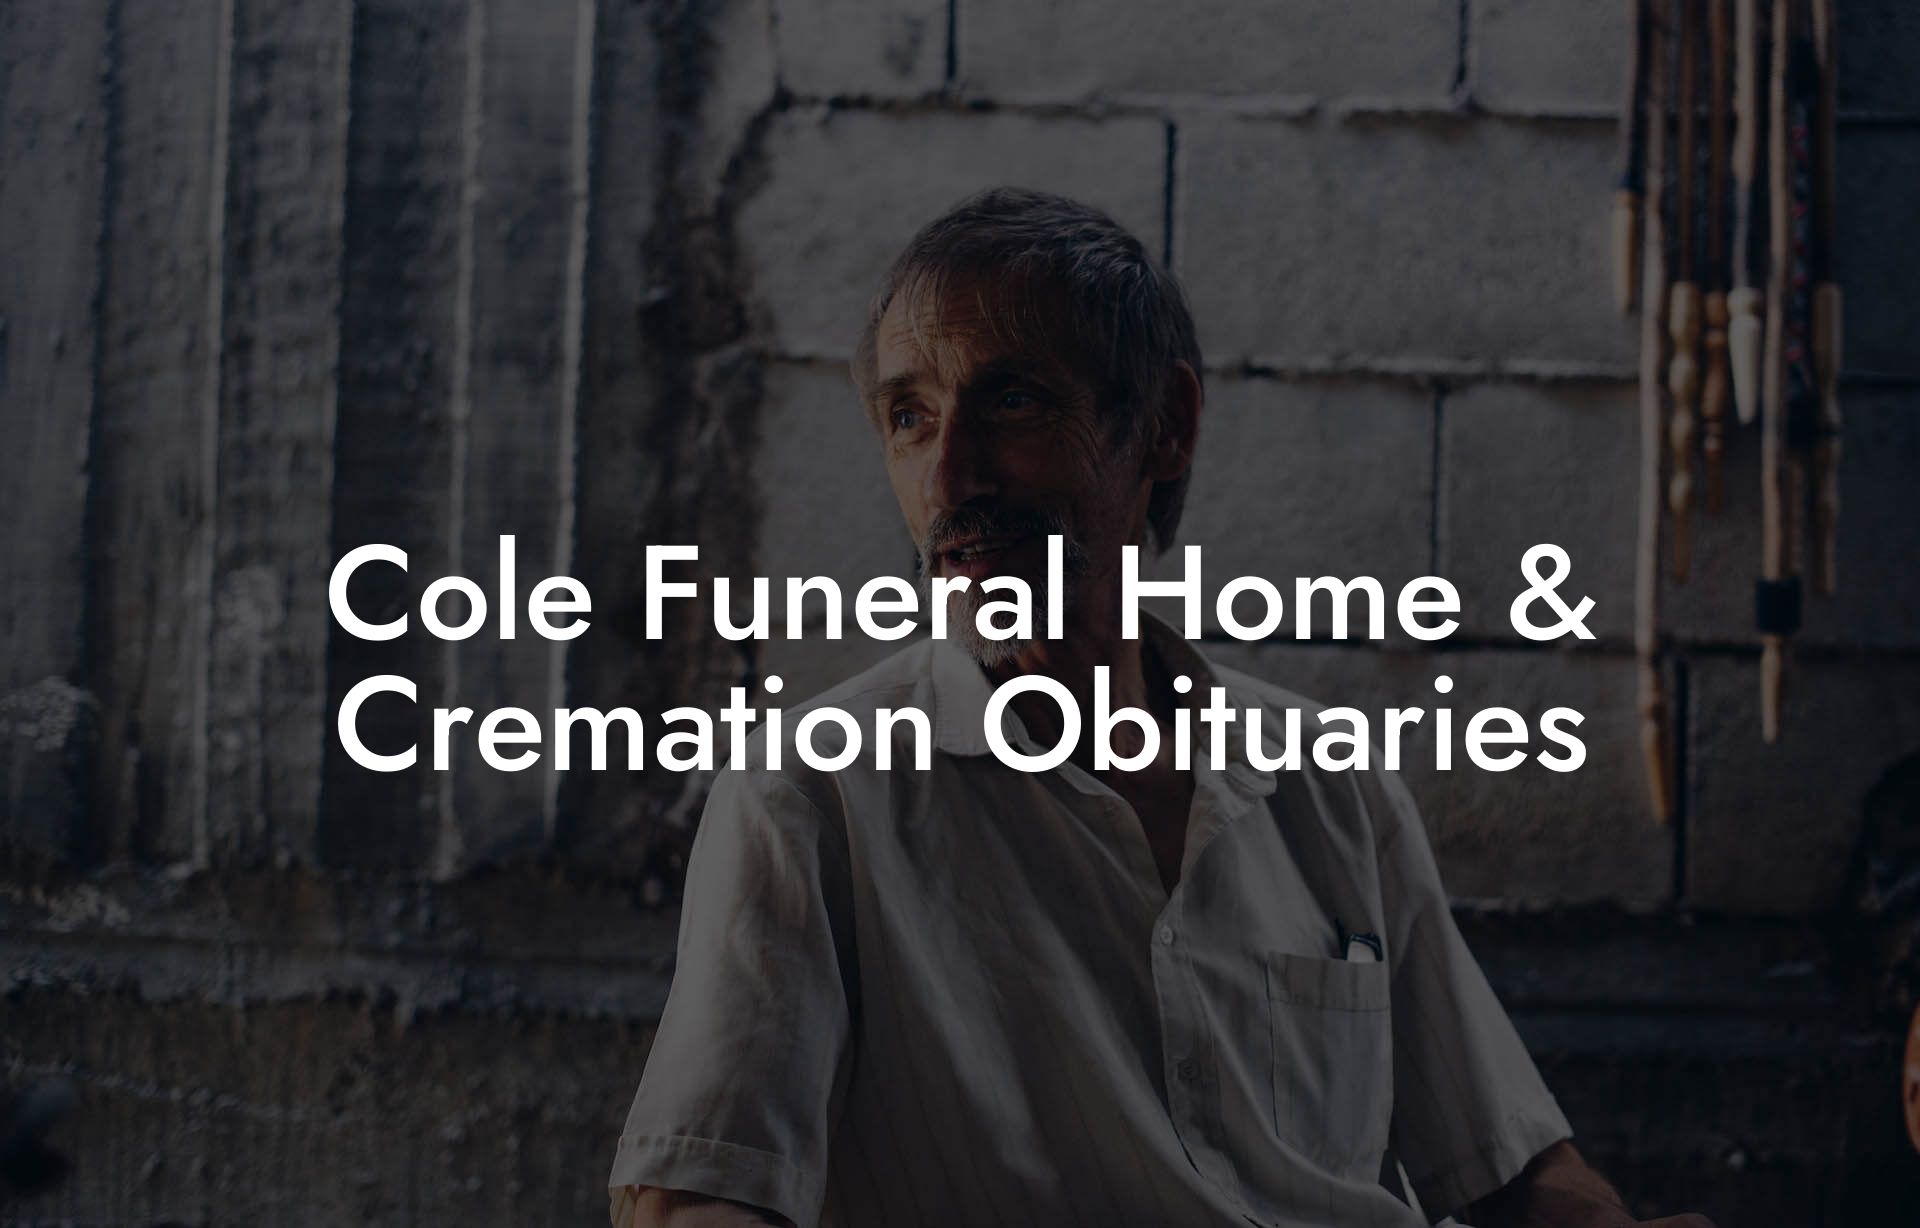 Cole Funeral Home & Cremation Obituaries - Eulogy Assistant